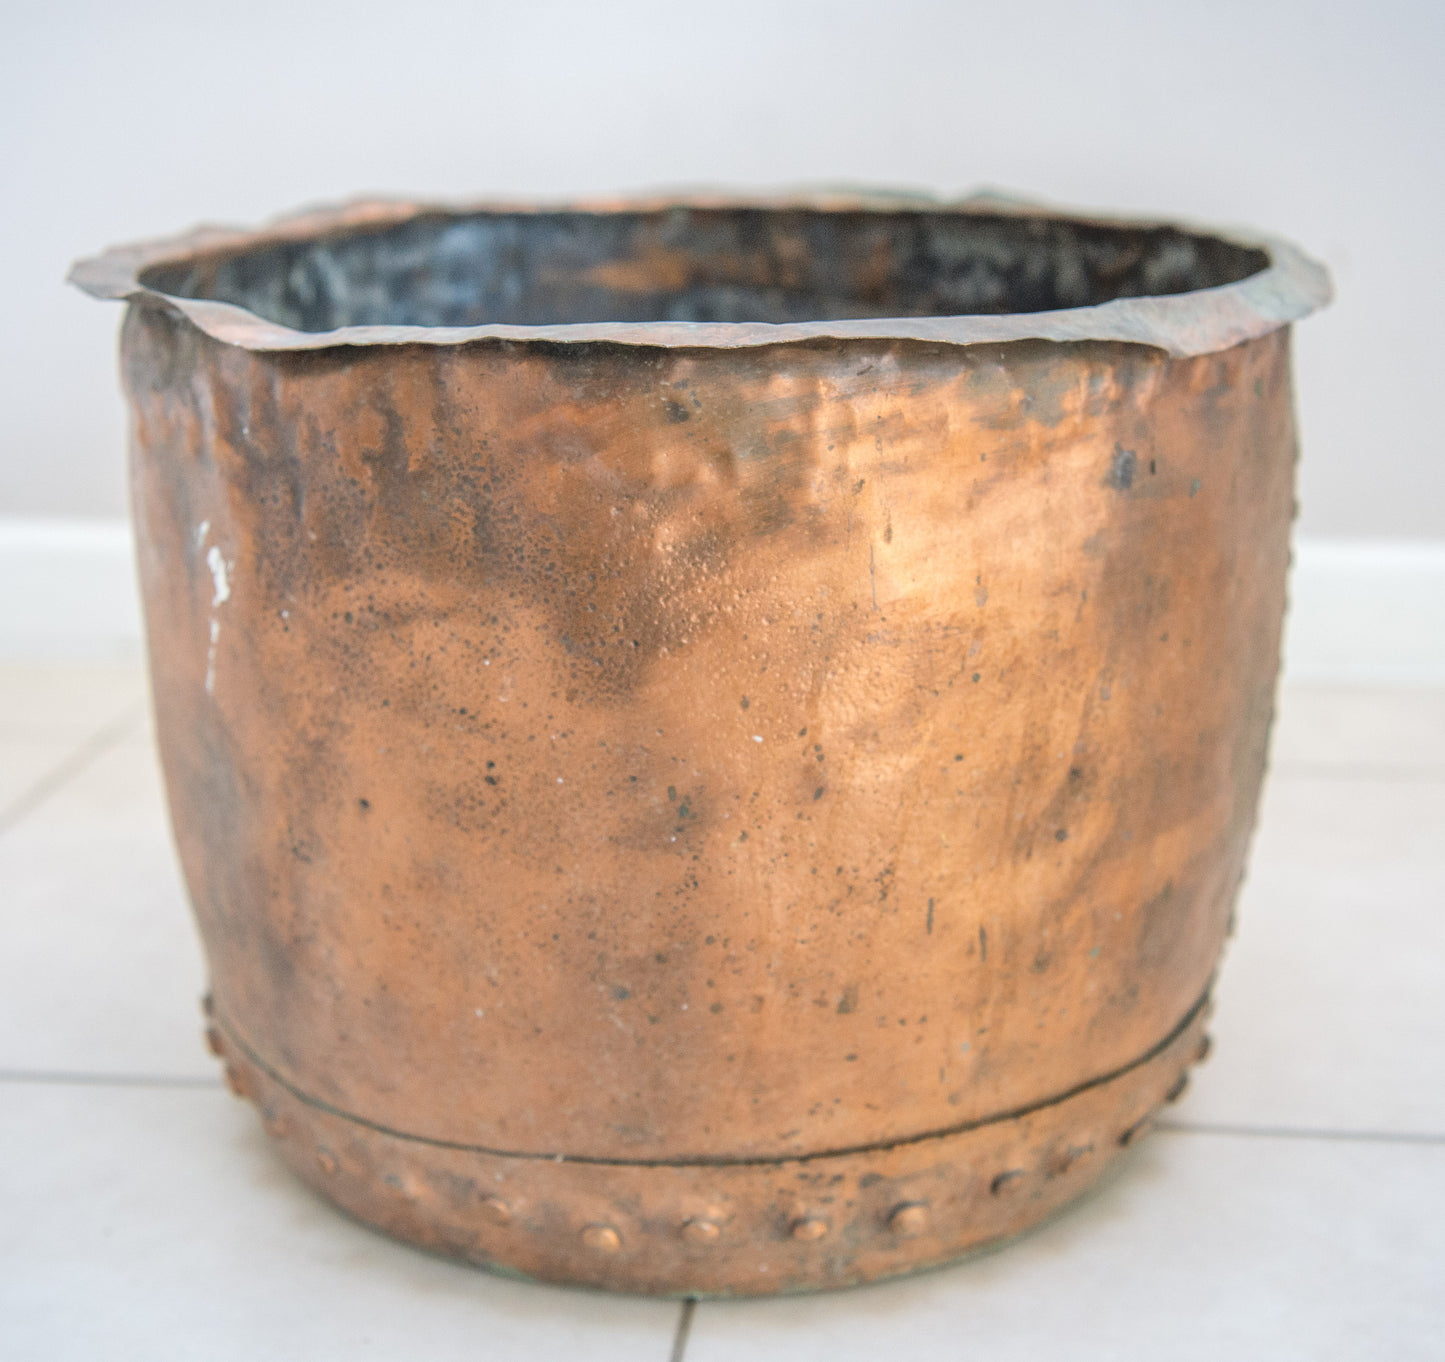 Antique Riveted Copper Cauldron Early 19th Century.English.